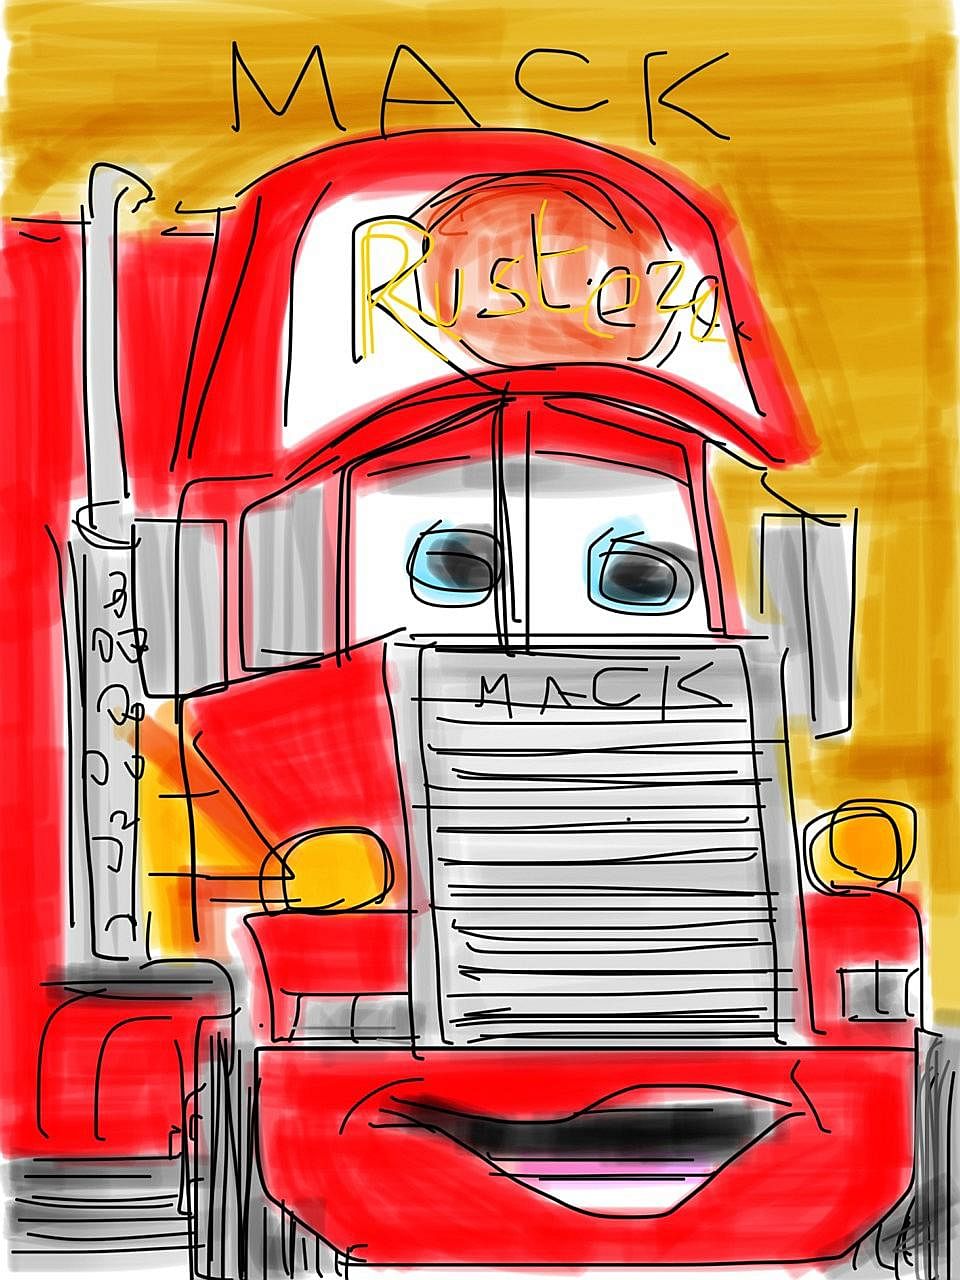 The drawings, which started as a way to encourage the grandson's interest in letters and words, have evolved from stick figures to more complex subjects such as Mack the truck (above) from the film Cars, and BB-8, the droid from Star Wars.